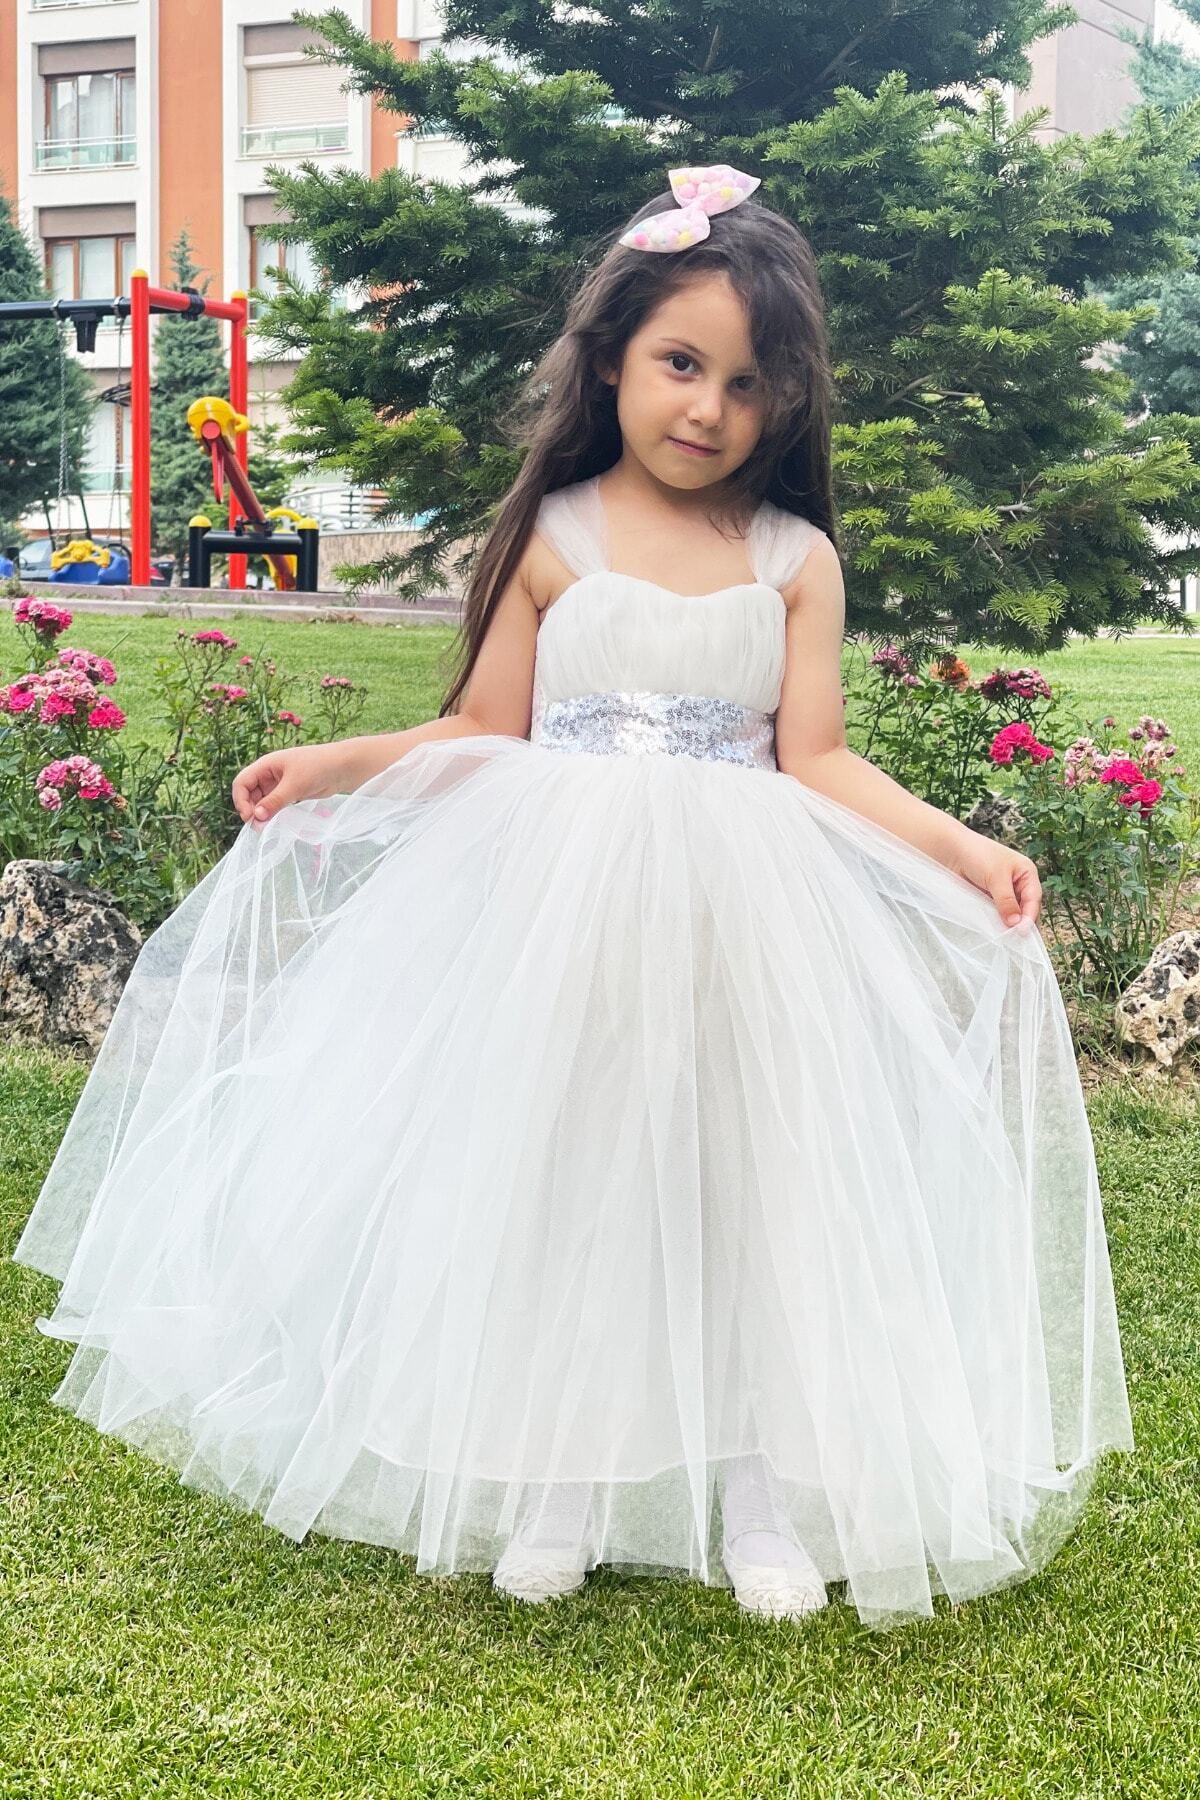 Lovebay Baby Grils Pearl Tulle Princess Dress Birthday Wedding Gown Dresses  for Toddler Kids 0-5 Years - Walmart.com